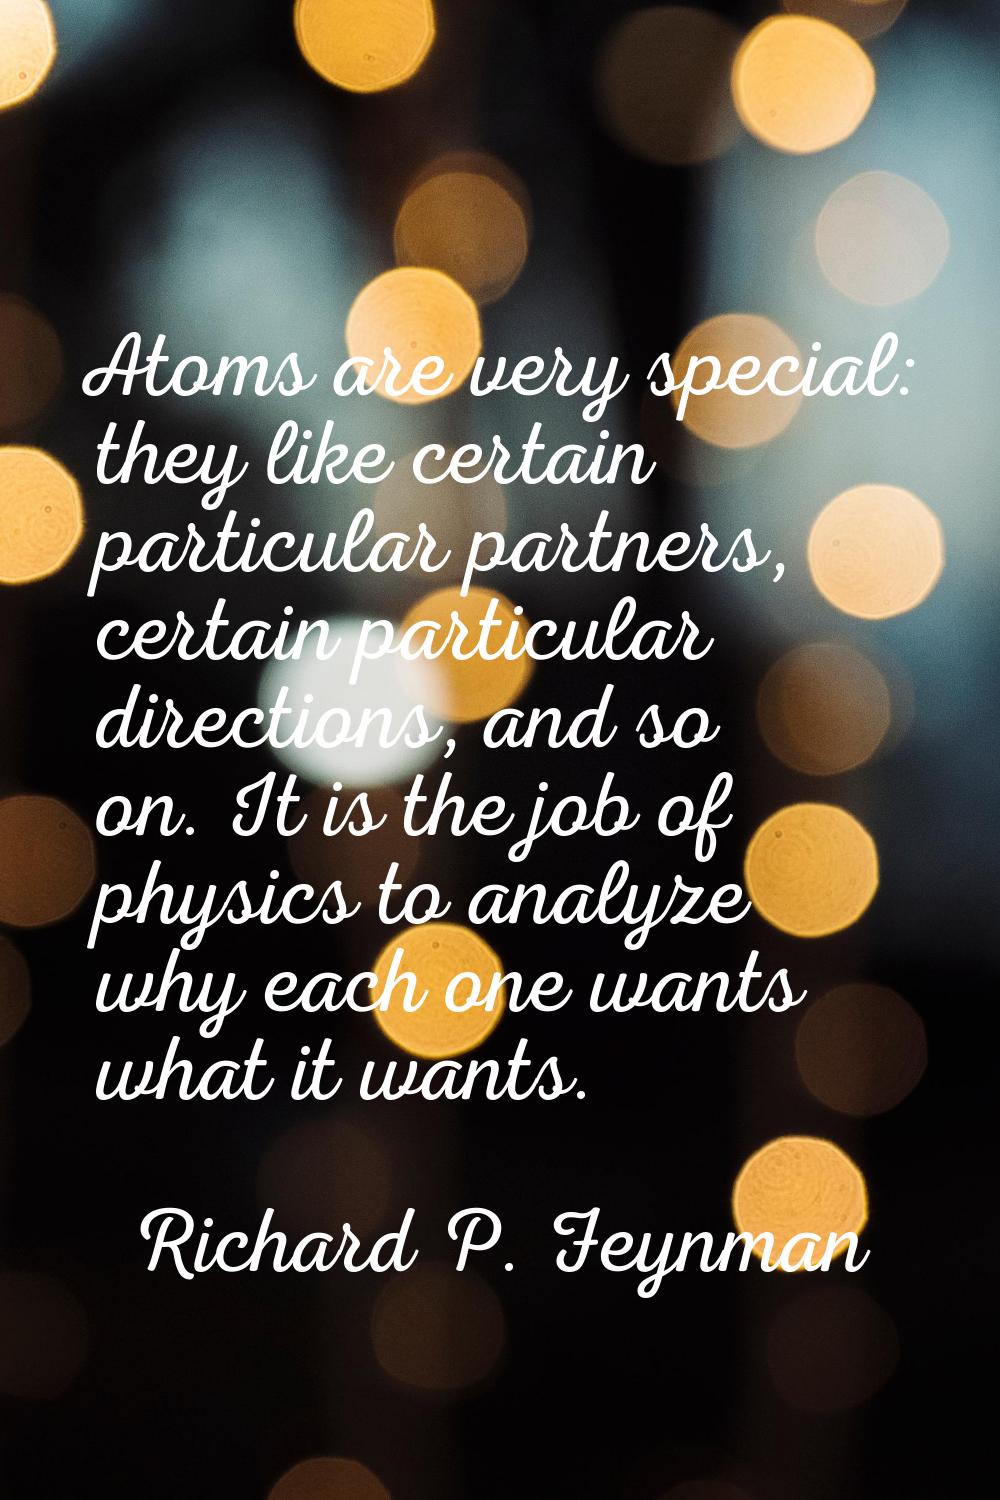 Atoms are very special: they like certain particular partners, certain particular directions, and s